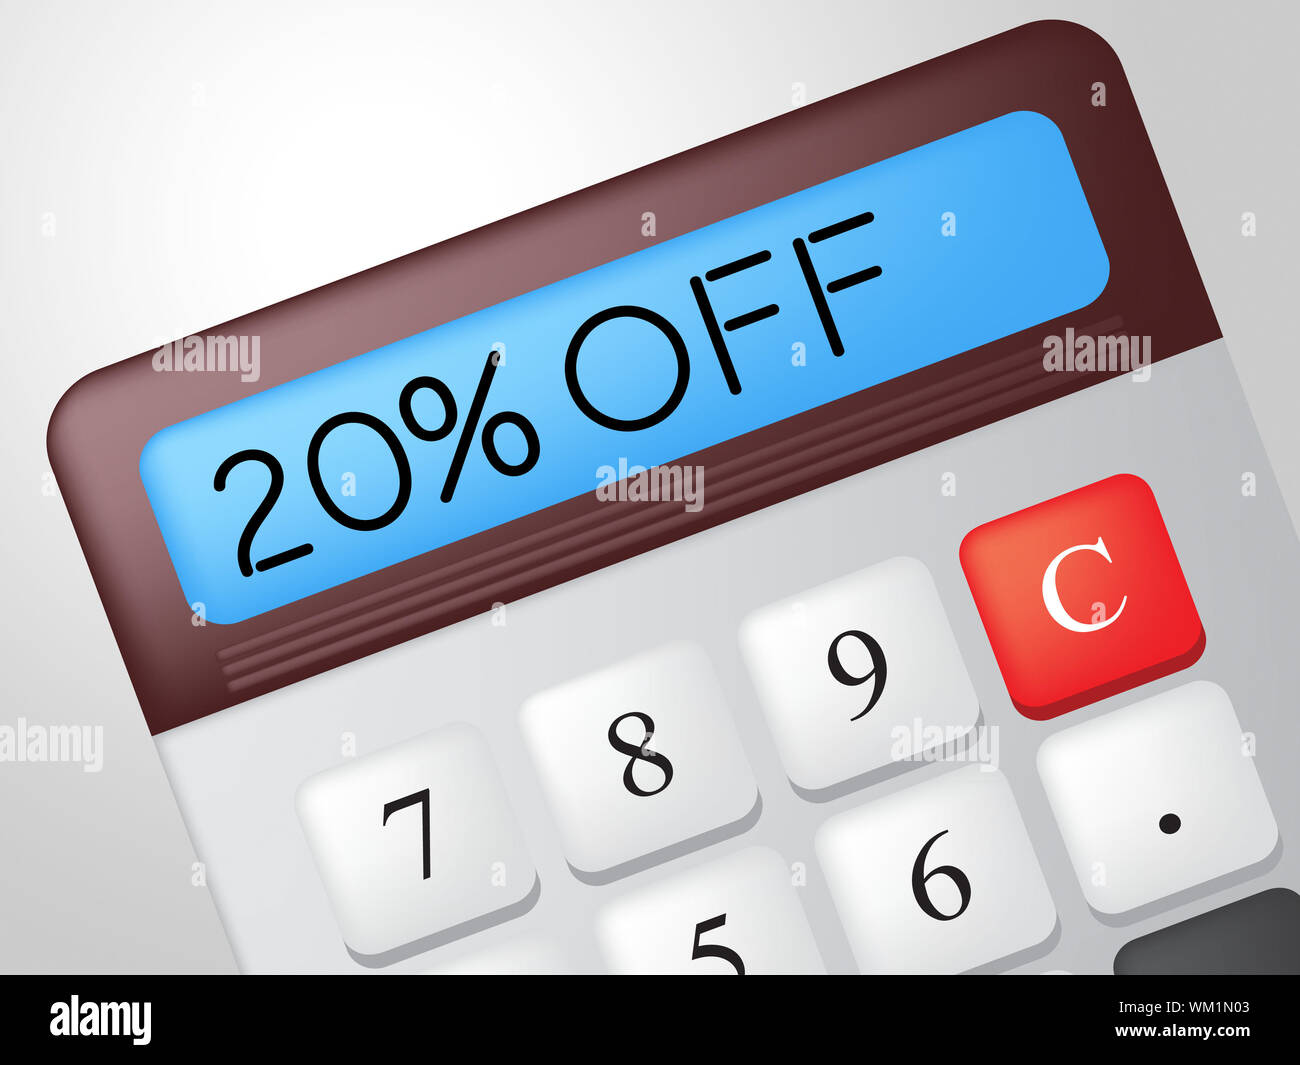 Twenty Percent Off Indicating Reduction Calculator And Discount Stock Photo  - Alamy